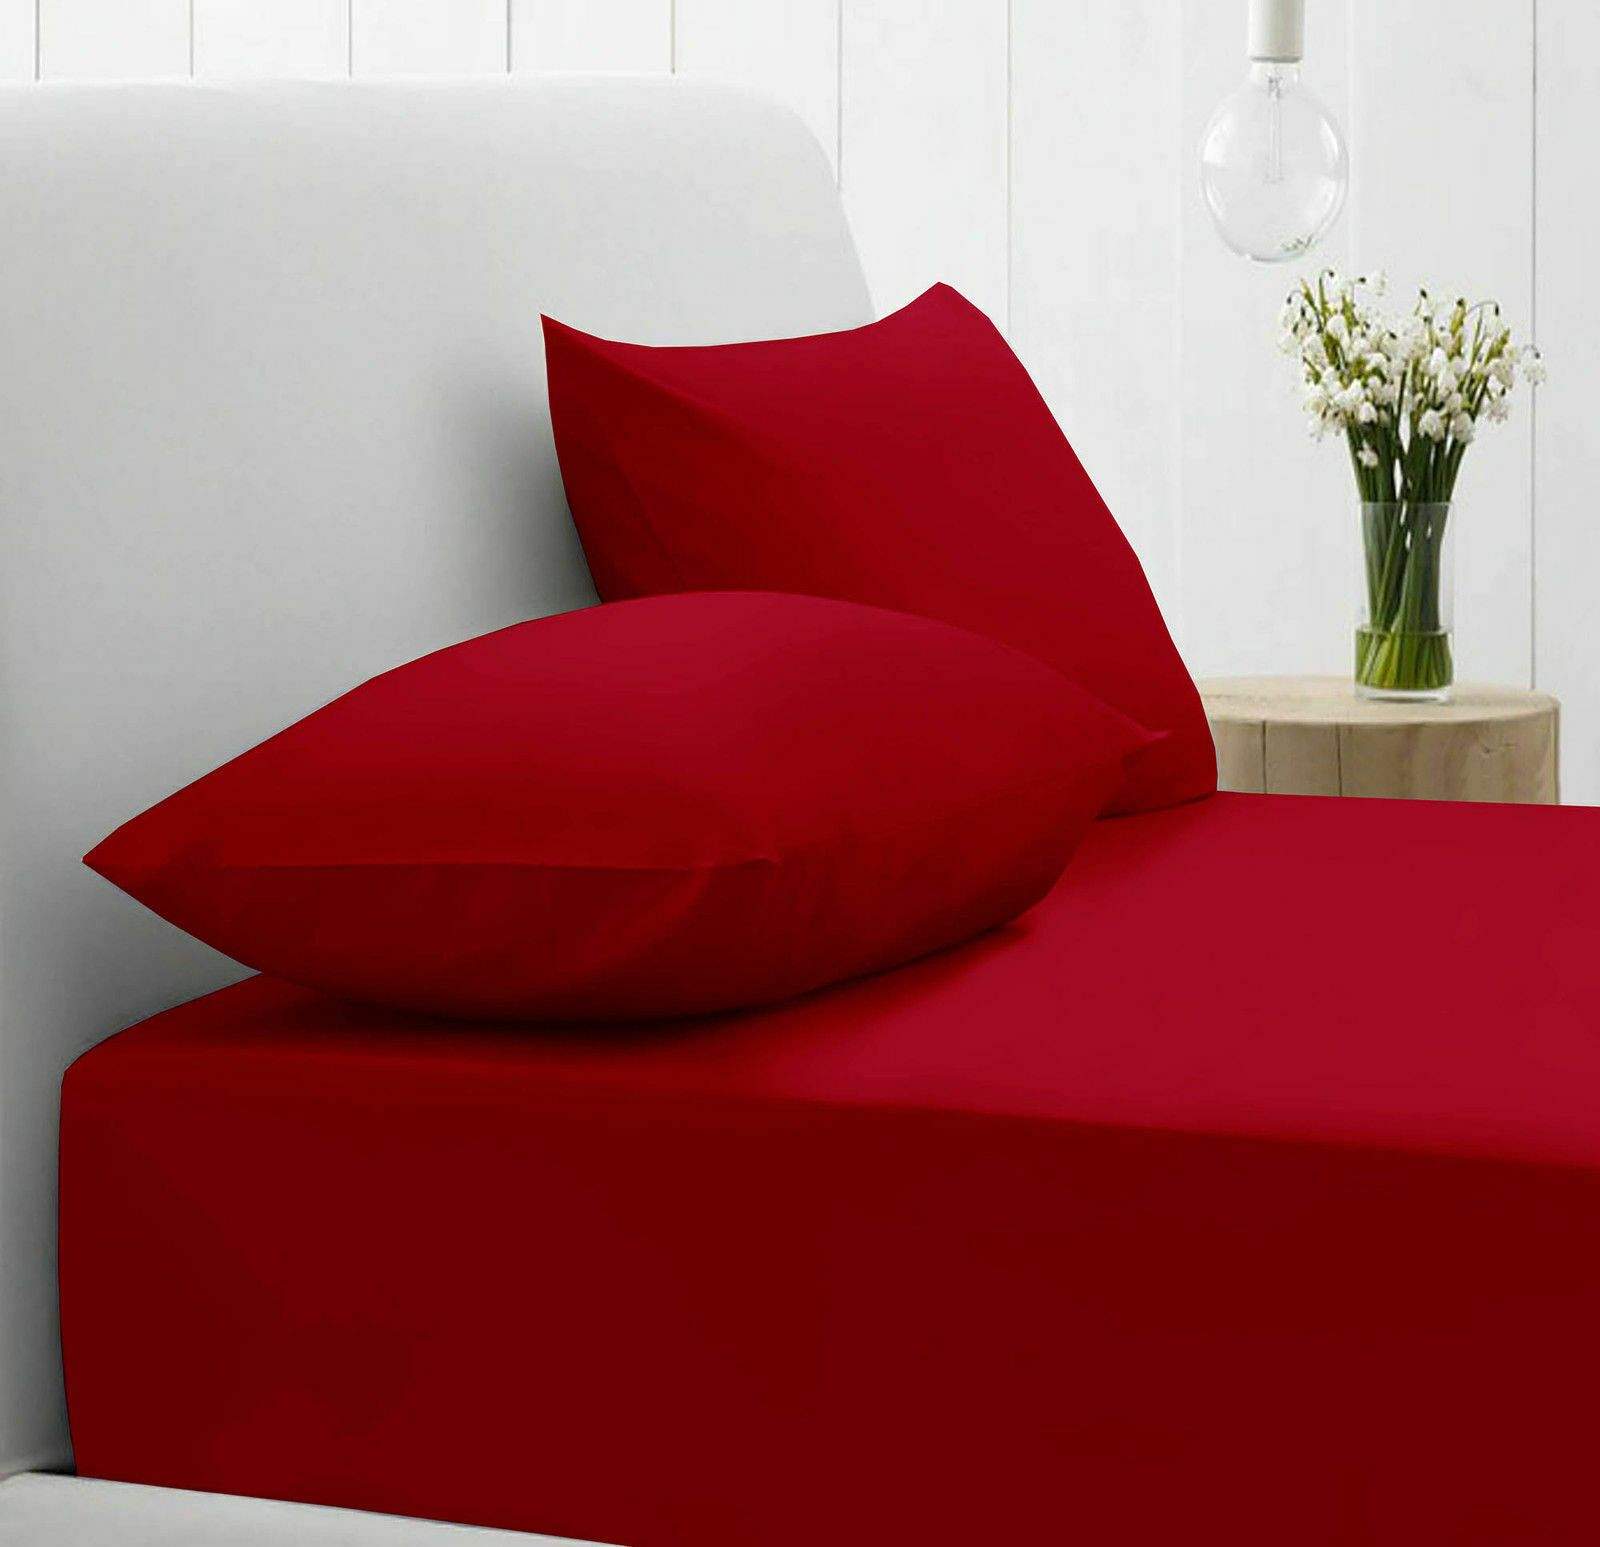 4x Red TC180 Pillowcases 2x Housewife and 2x Oxford Pillow case Set Bed and Bath Linen